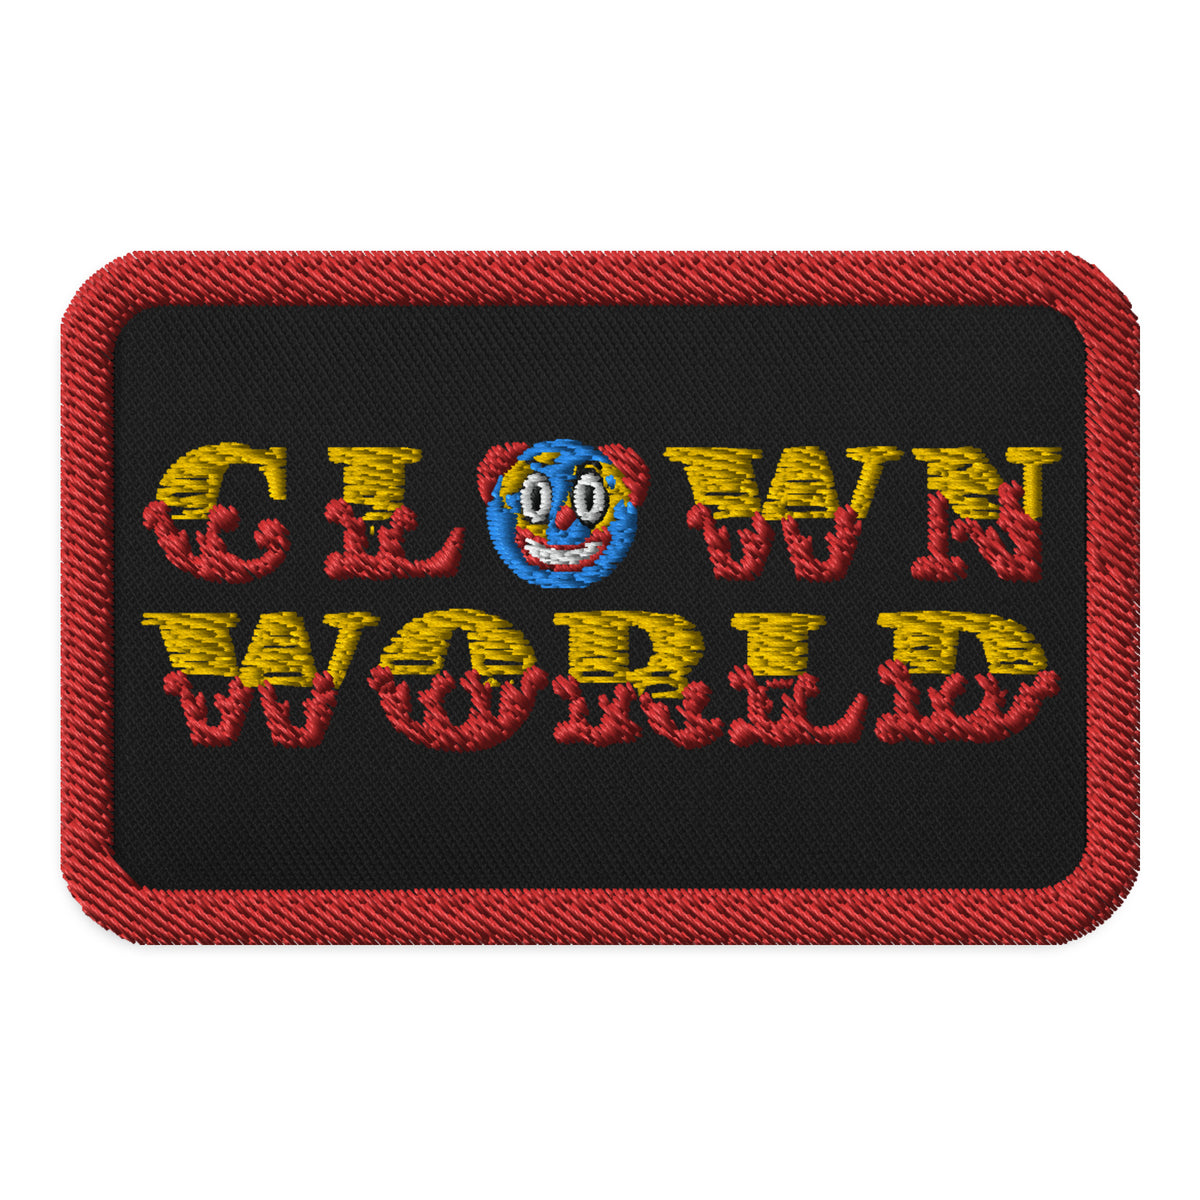 Clown World Embroidered patches - Liberty Maniacs